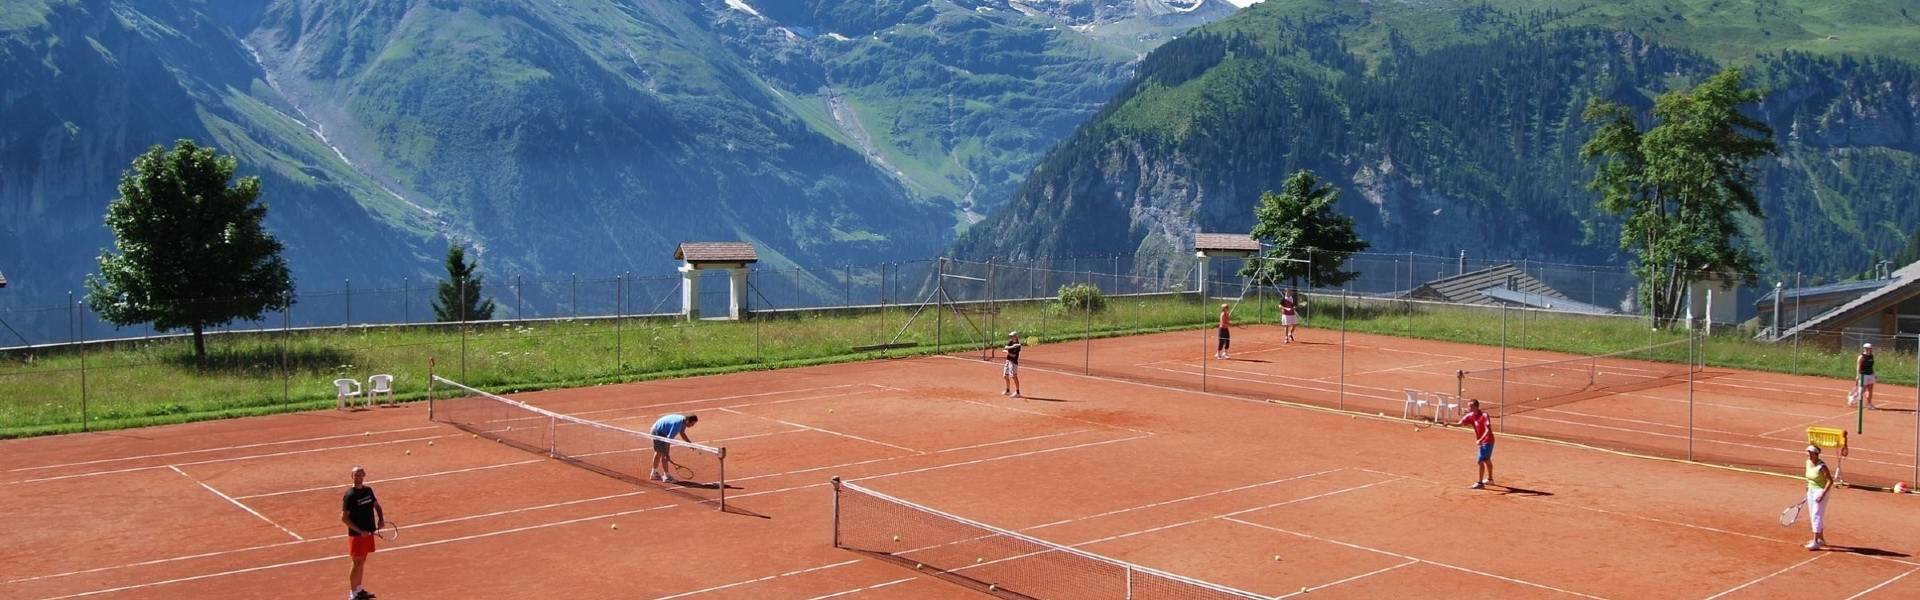 Stanglwirt Hotel outdoor clay tennis courts